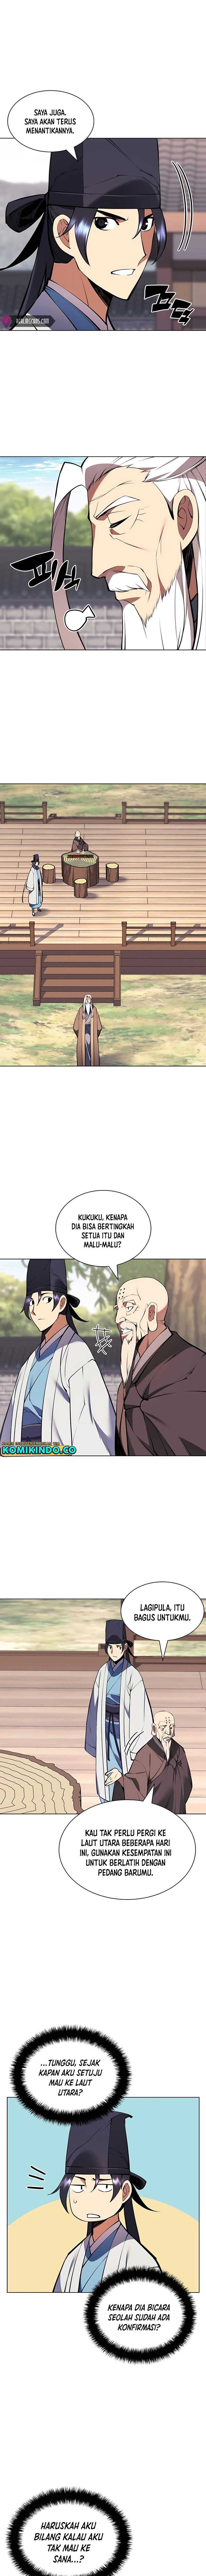 Records Of The Swordsman Scholar Chapter 89 - 117